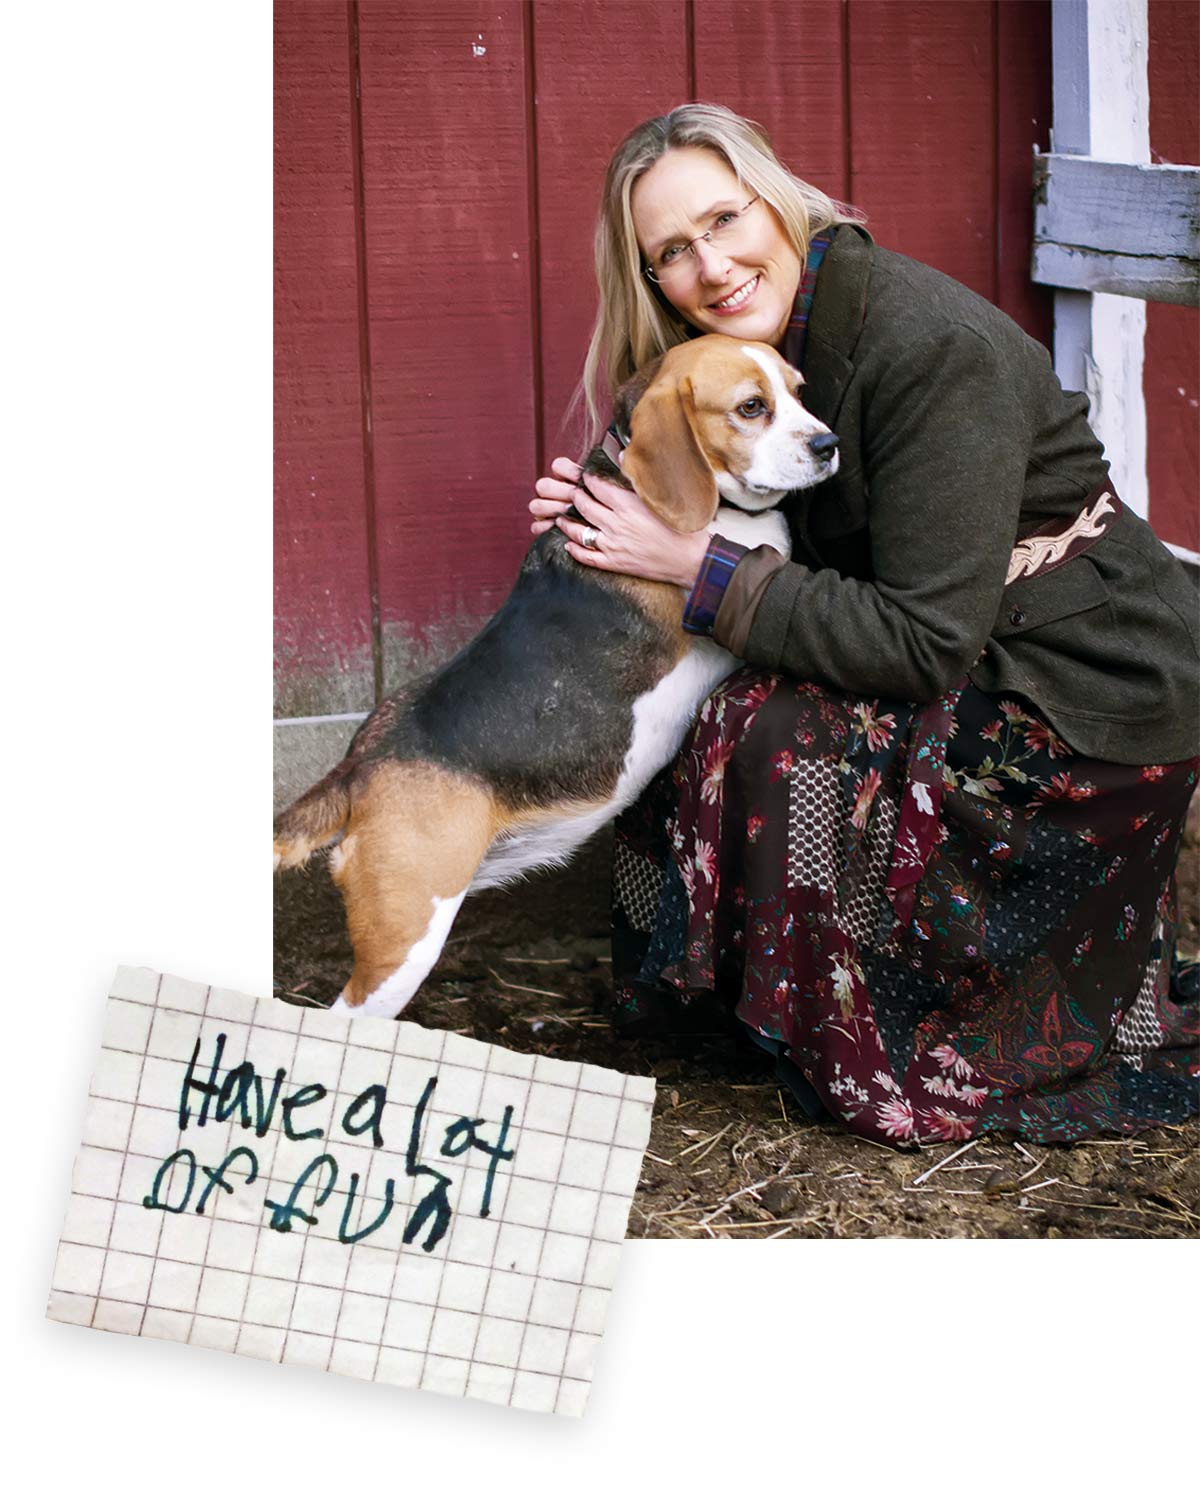 Scarlett Lewis with her Beagle and a "Have a lot of fun." note